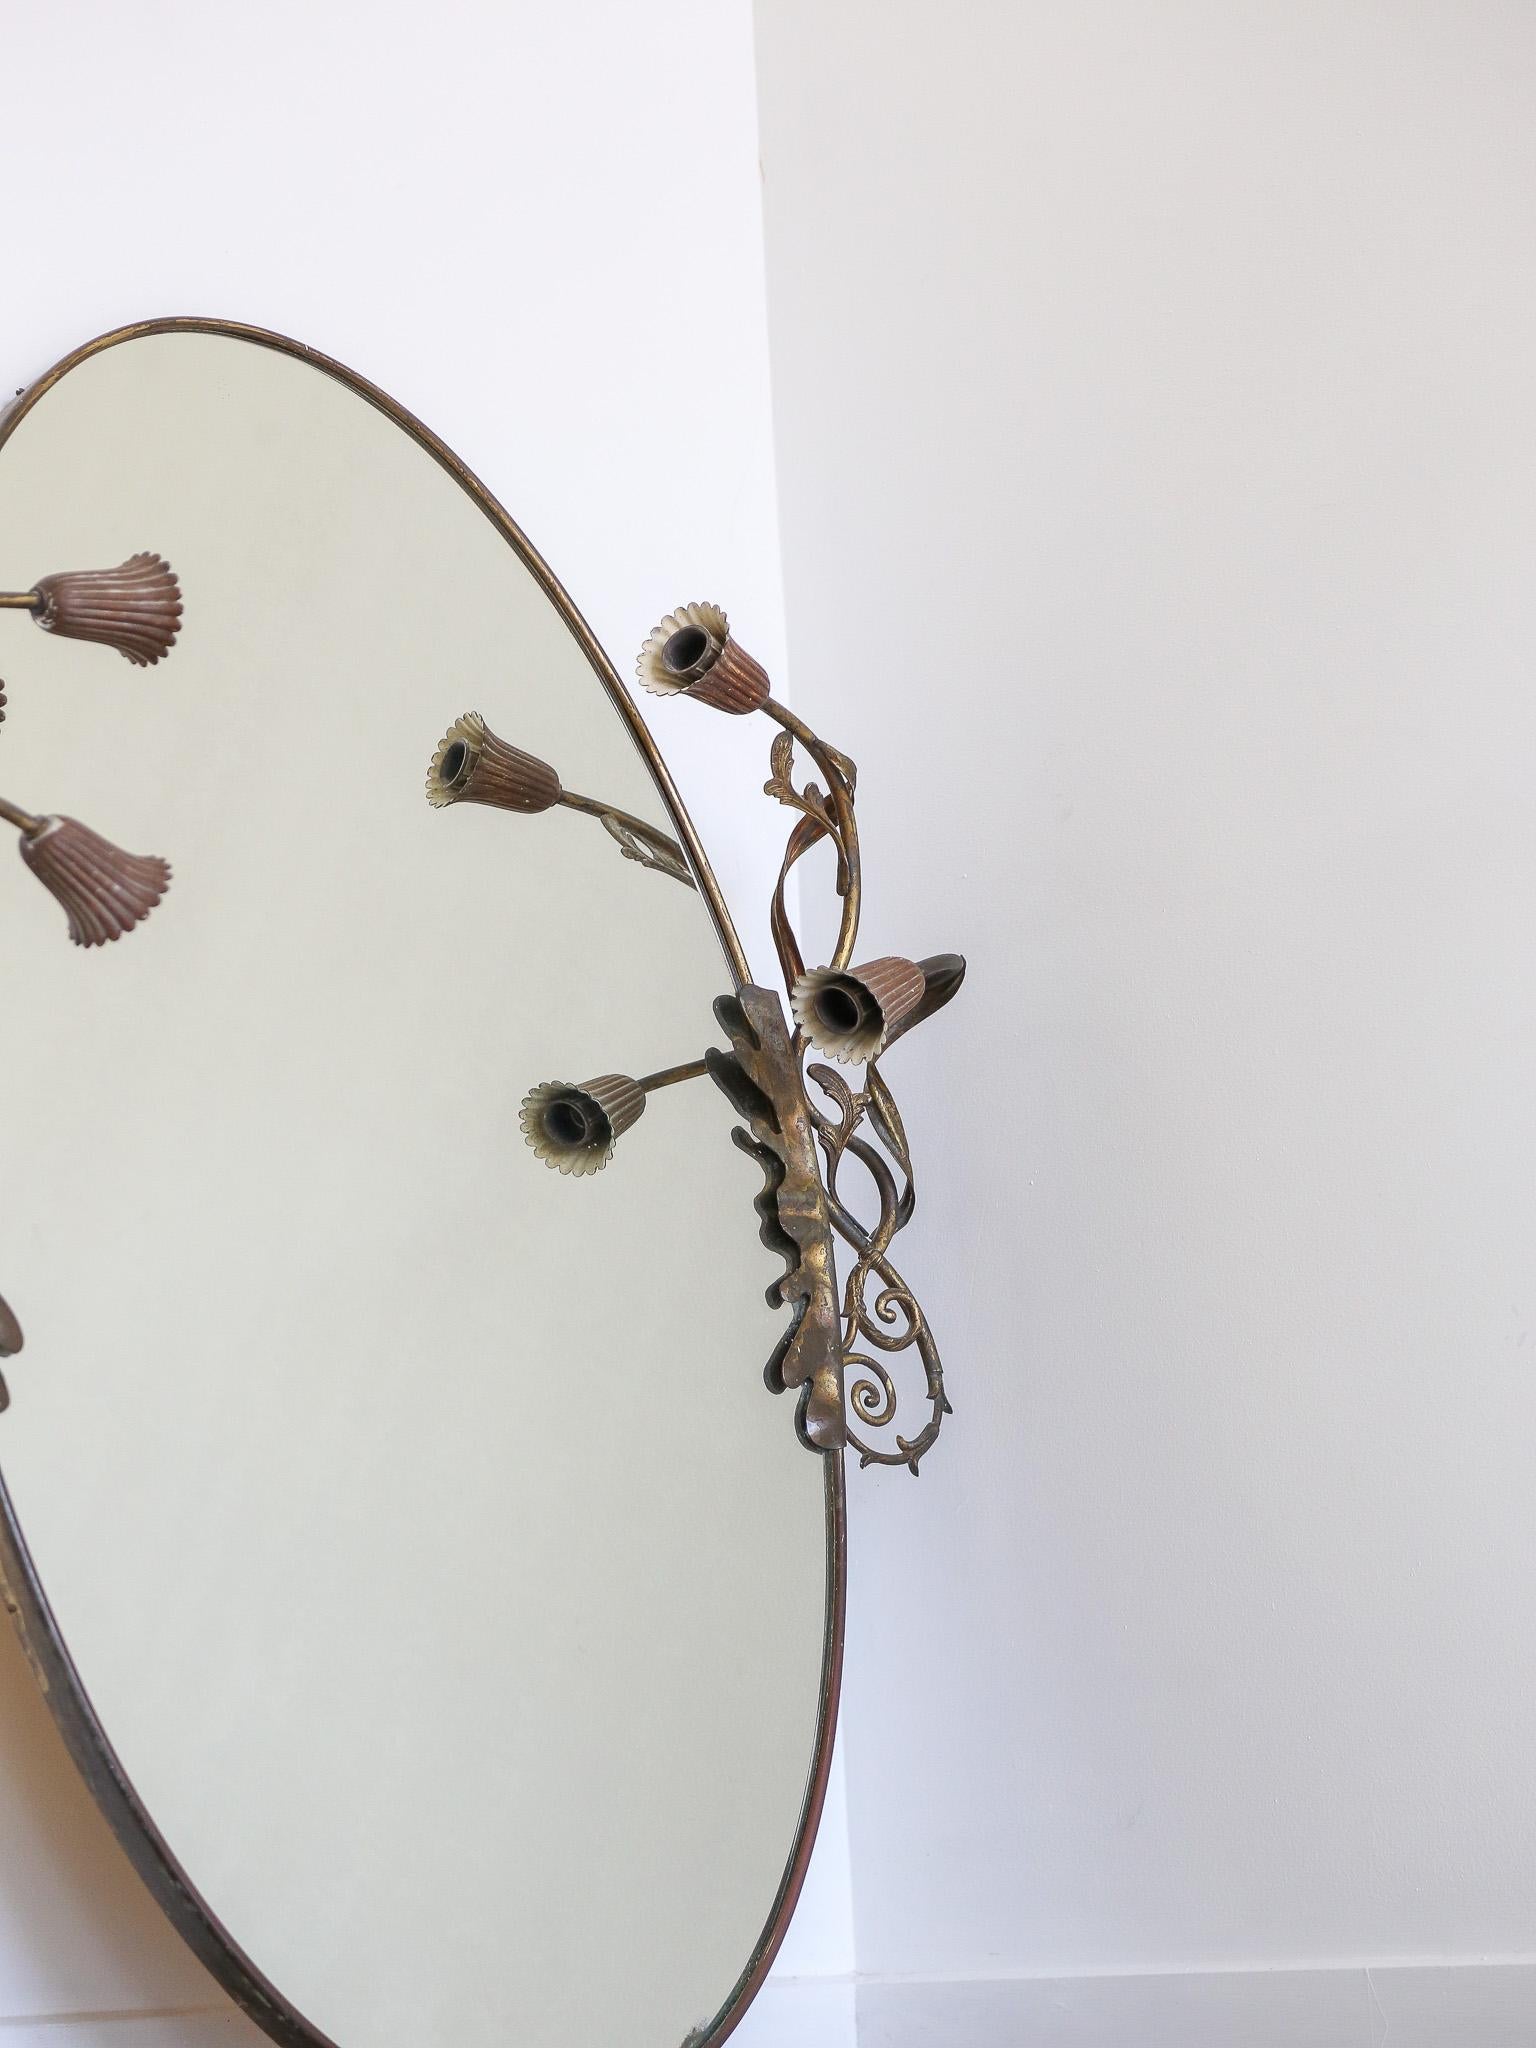  

Italian Art Deco brass oval wall mirror 1950

These mirrors were characterised by their frames made of brass, featuring sleek and geometric designs with clean lines. During the 1950s, brass was a popular material for home decor due to its